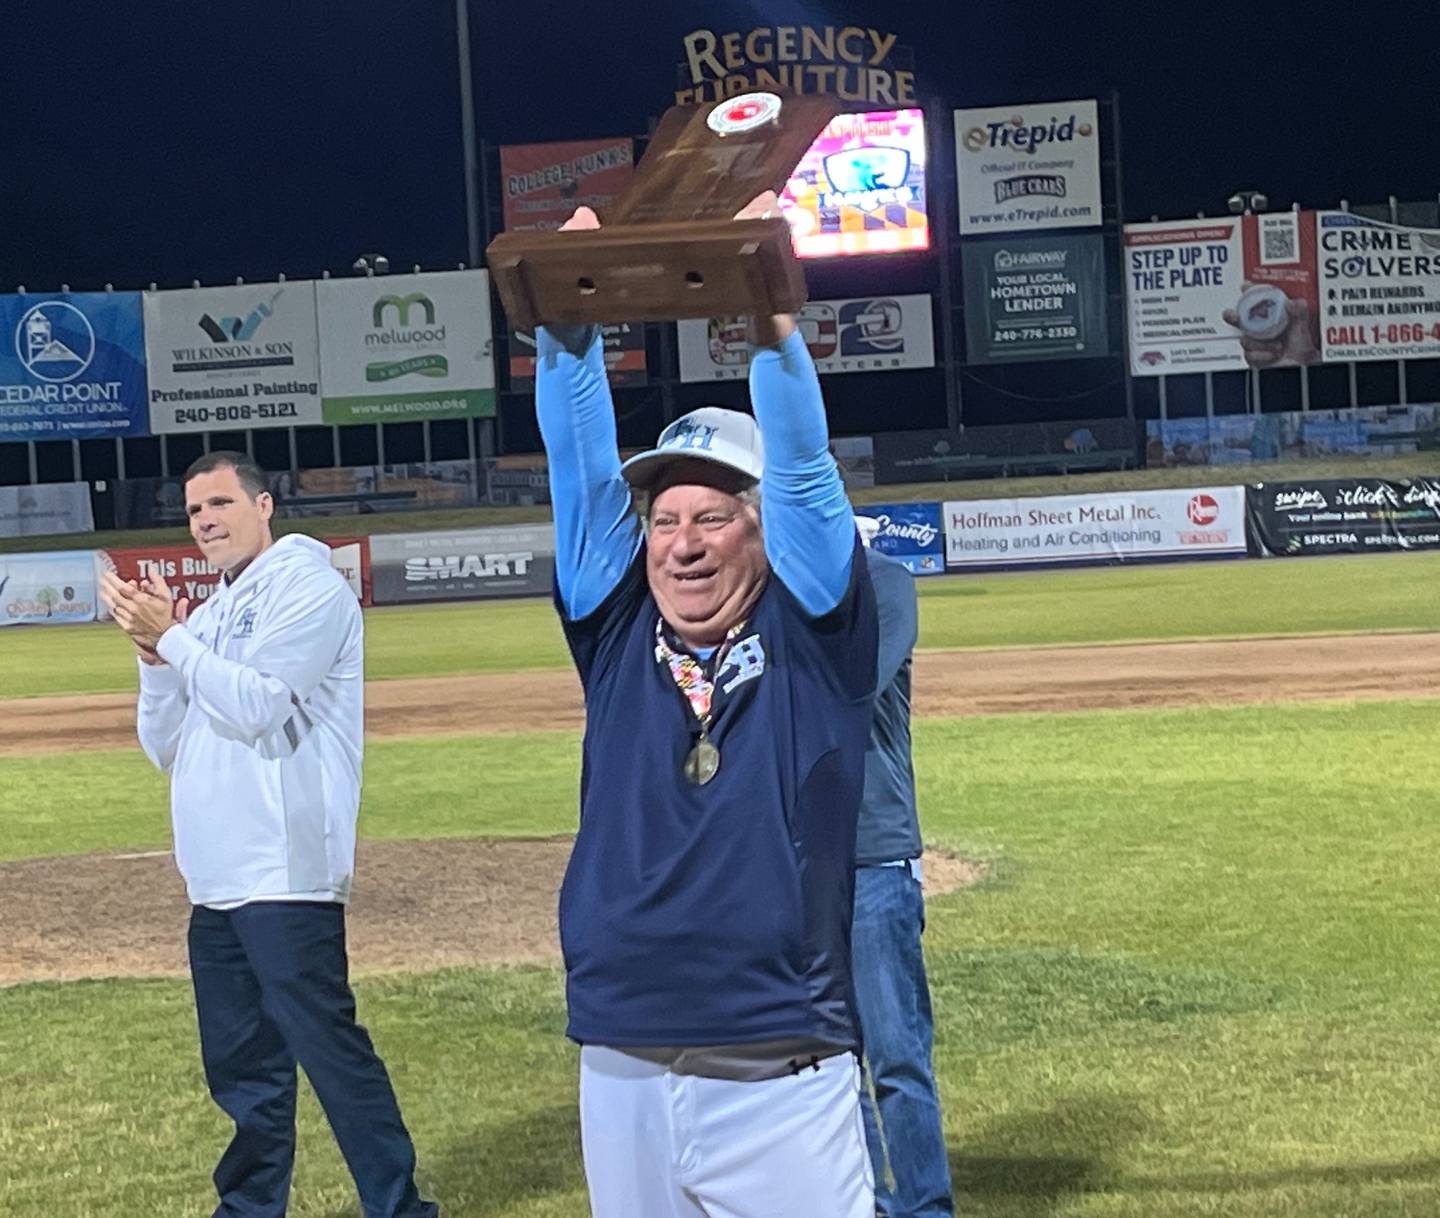 River Hill baseball coach Craig Estrin holds up the Class 3A state championship trophy Saturday evening. The No. 3 Hawks won their first title since 2009 with a 1-0 win over 15th-ranked C. Milton Wright at Regency Furniture Stadium in Southern Maryland.